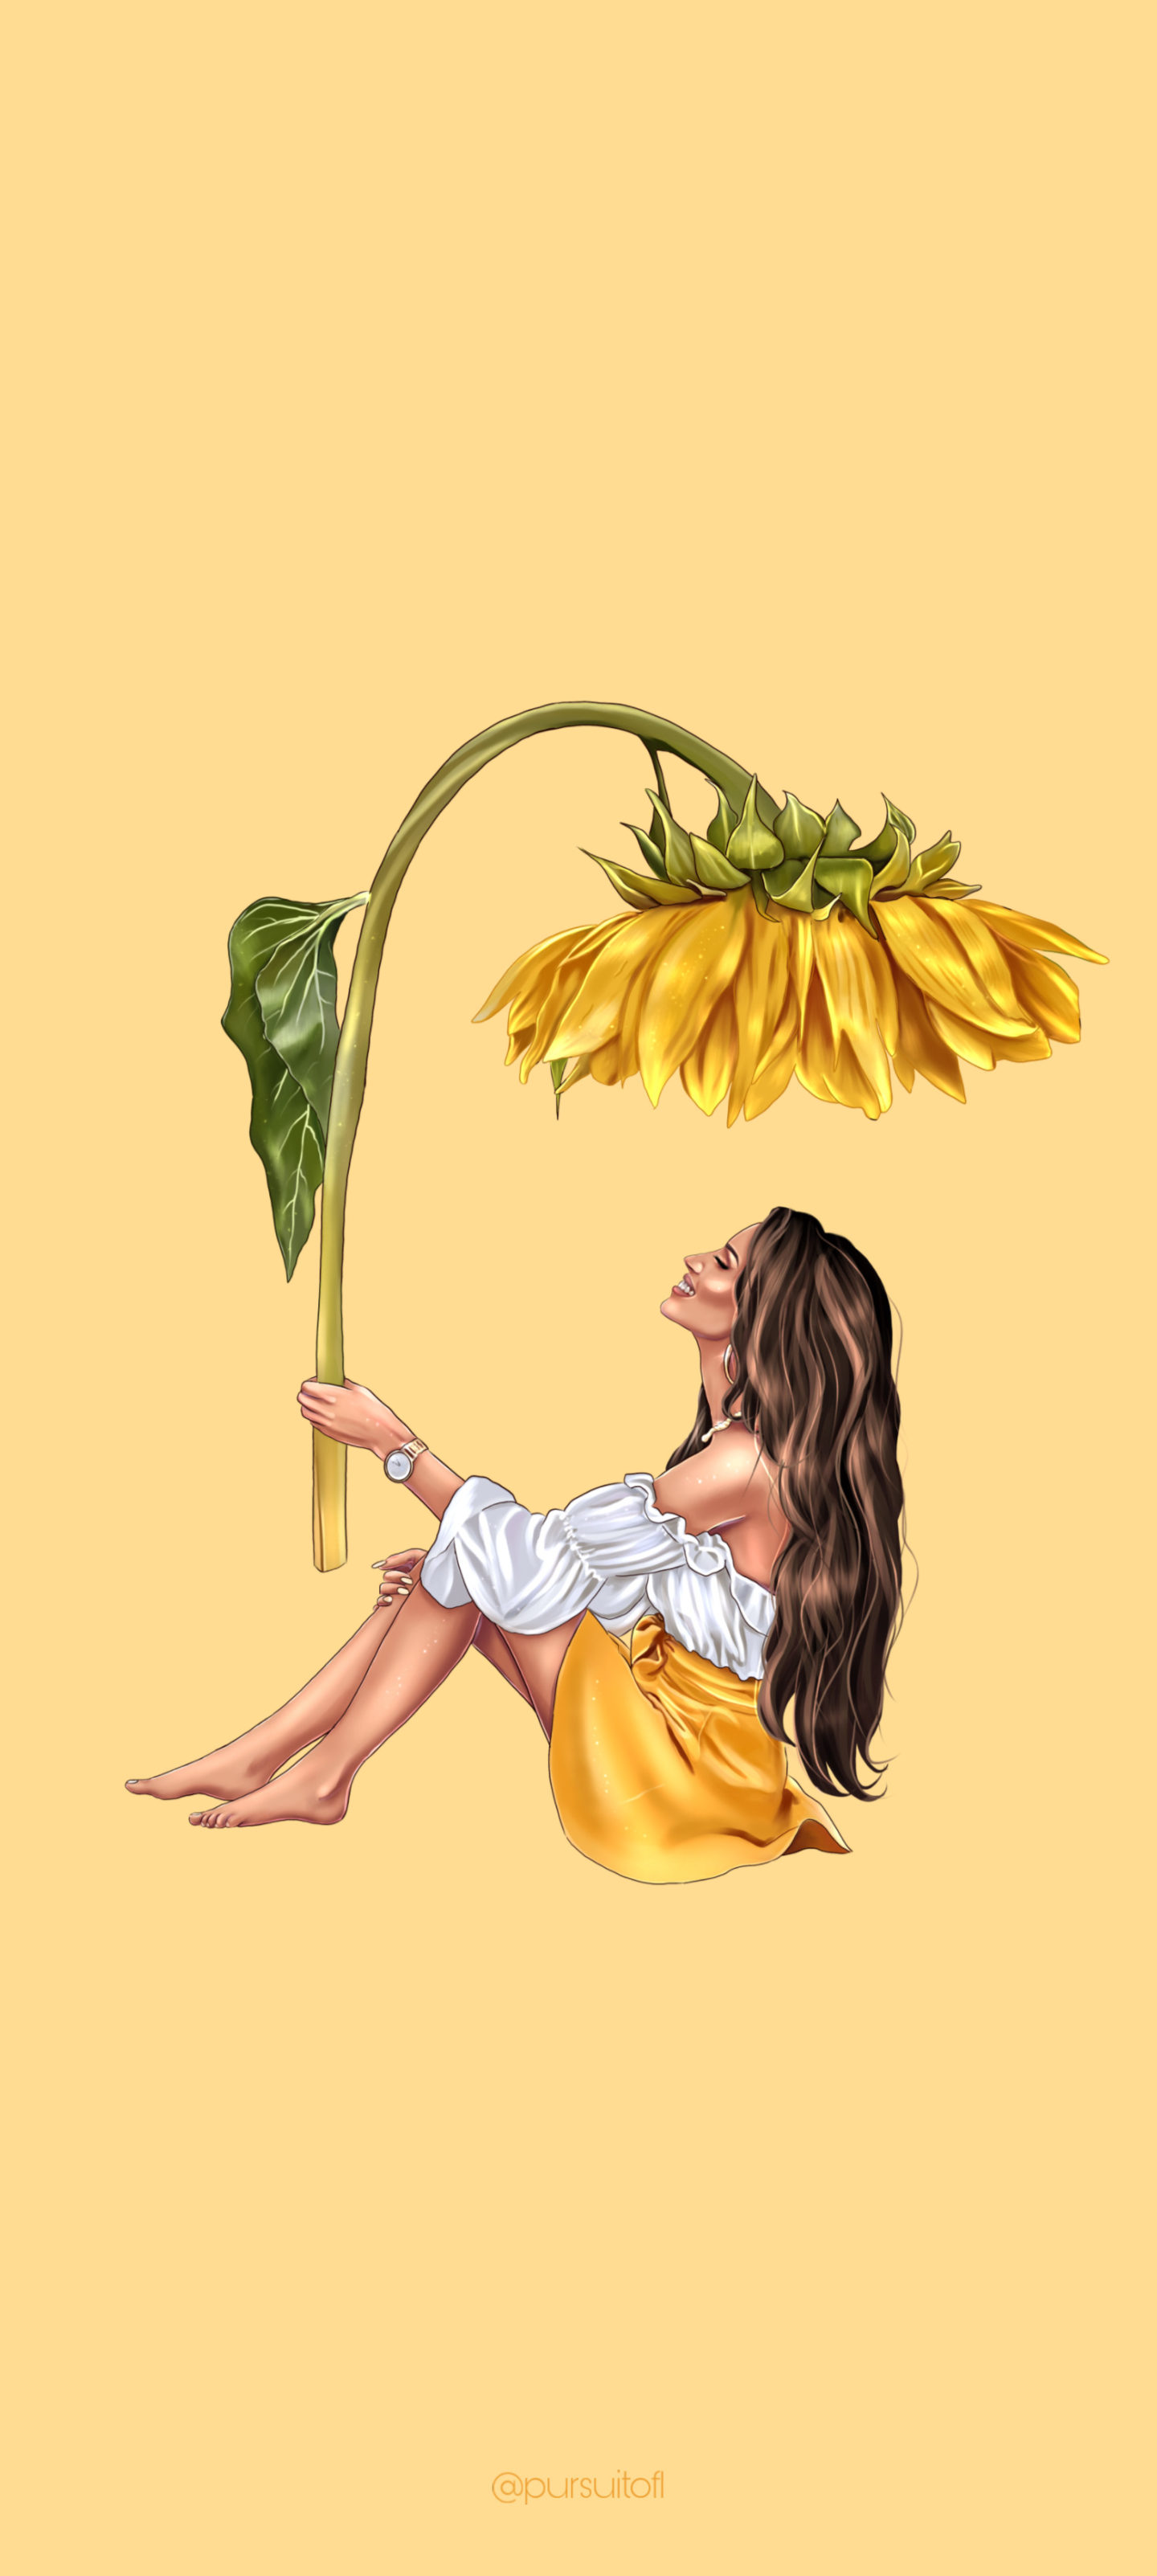 Yellow phone wallpaper with girl or woman in a summer outfit holding an oversized sunflower.